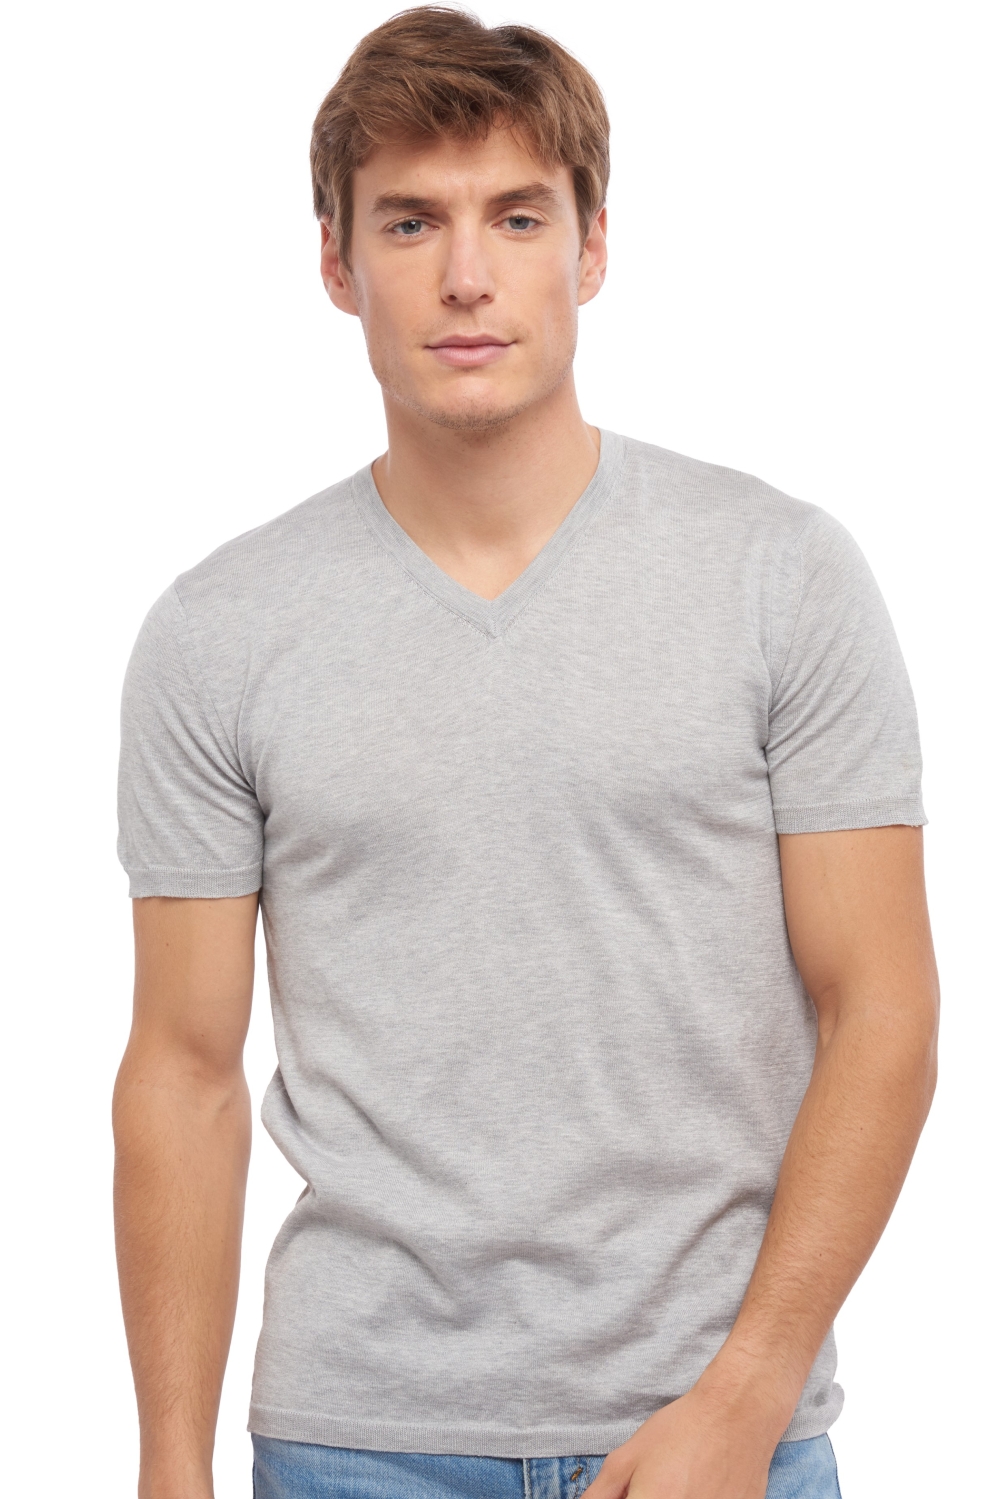 Coton Giza 45 pull homme col v michael flanelle xl